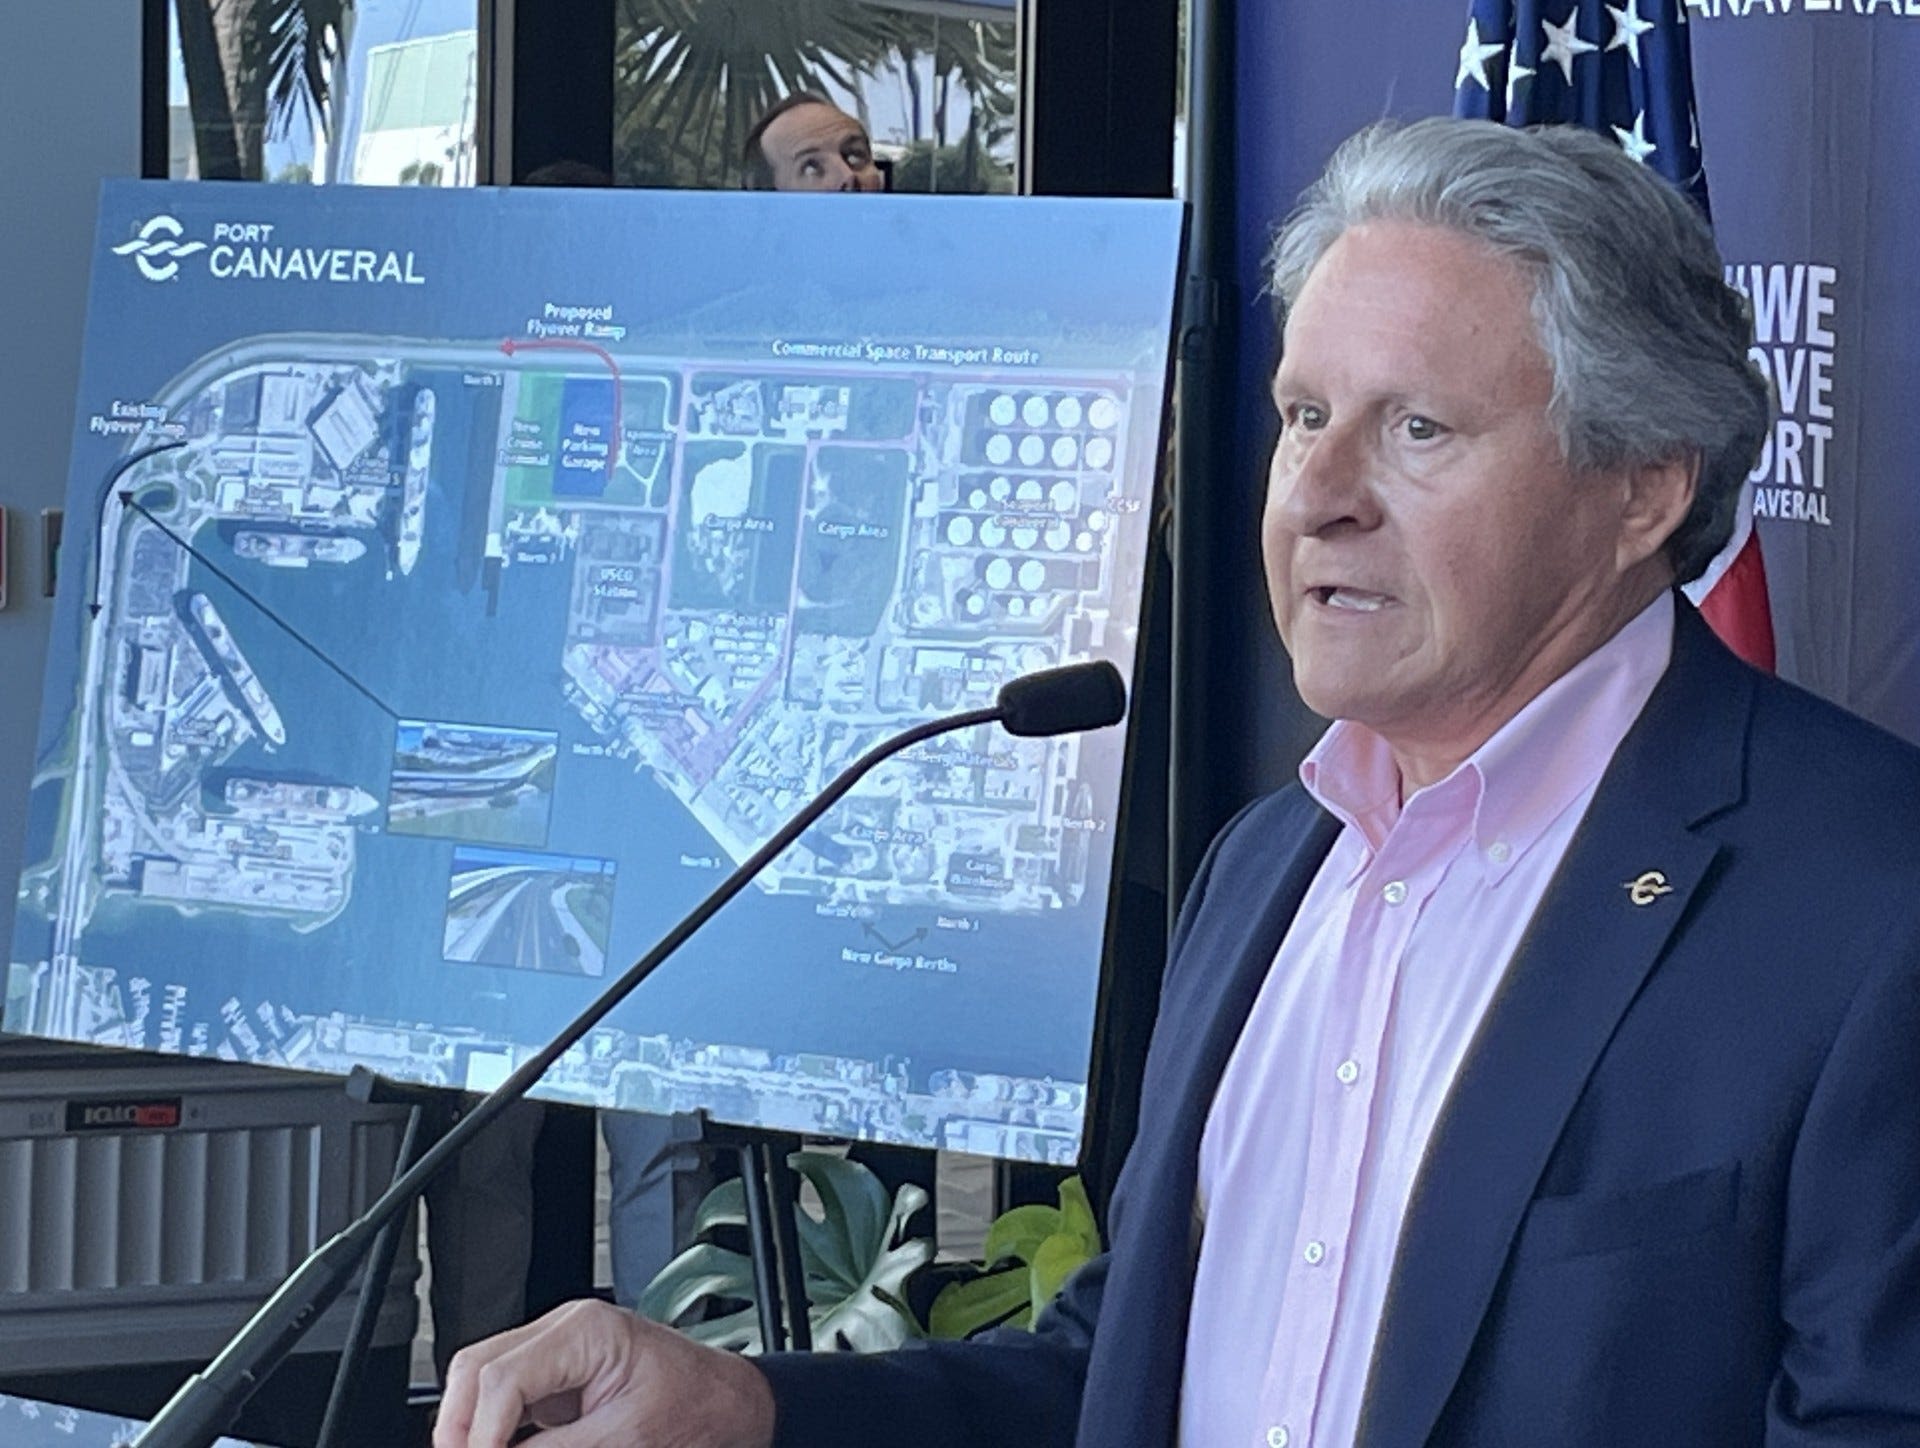 Port Canaveral announces plans for new north side cruise terminal at cargo berth site